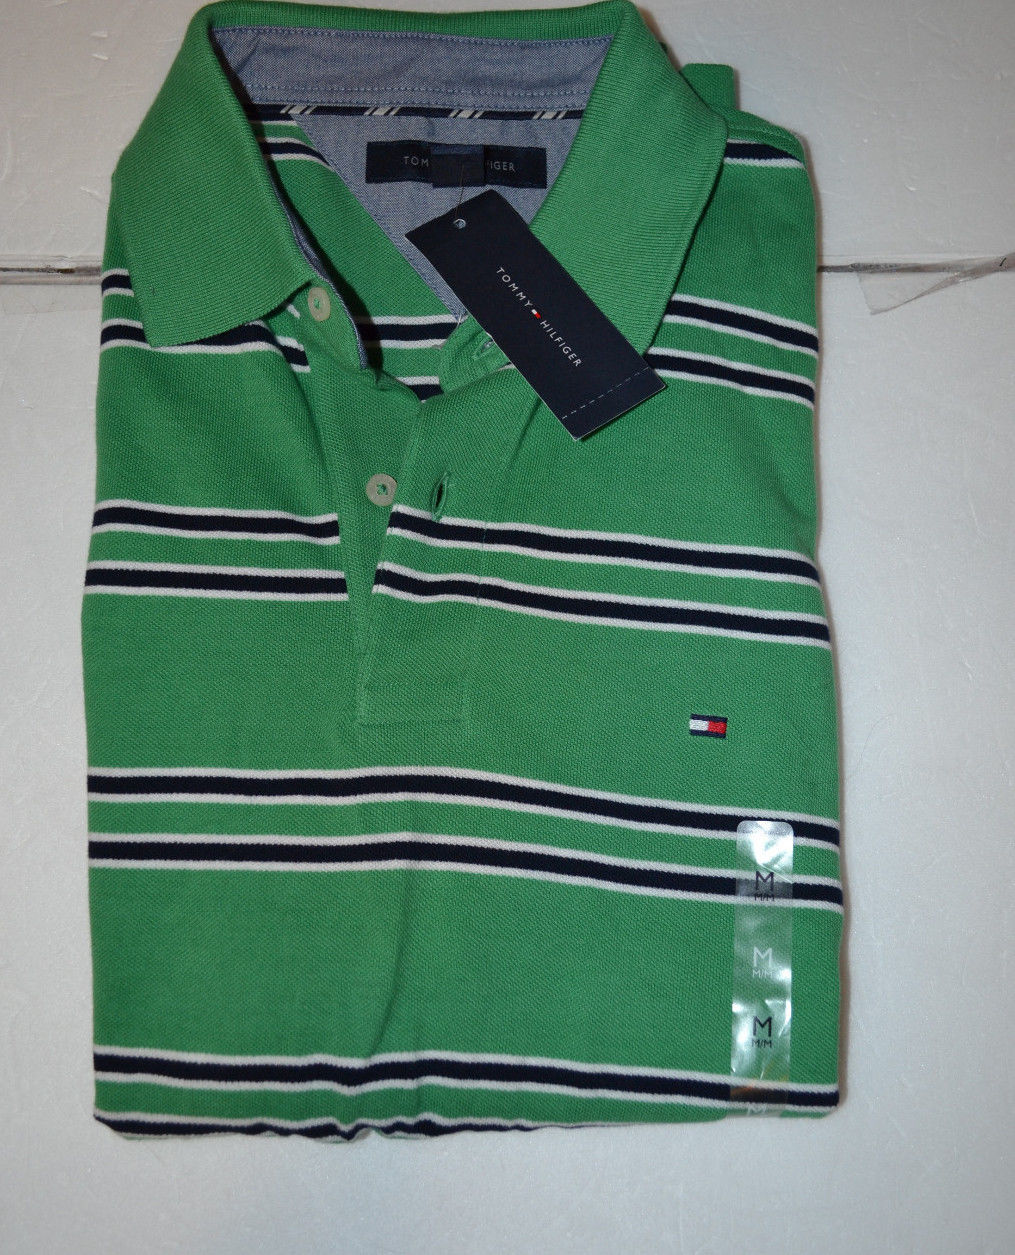 Primary image for Tommy Hilfiger Mens Polos  Sizes   M or L    NWT Green